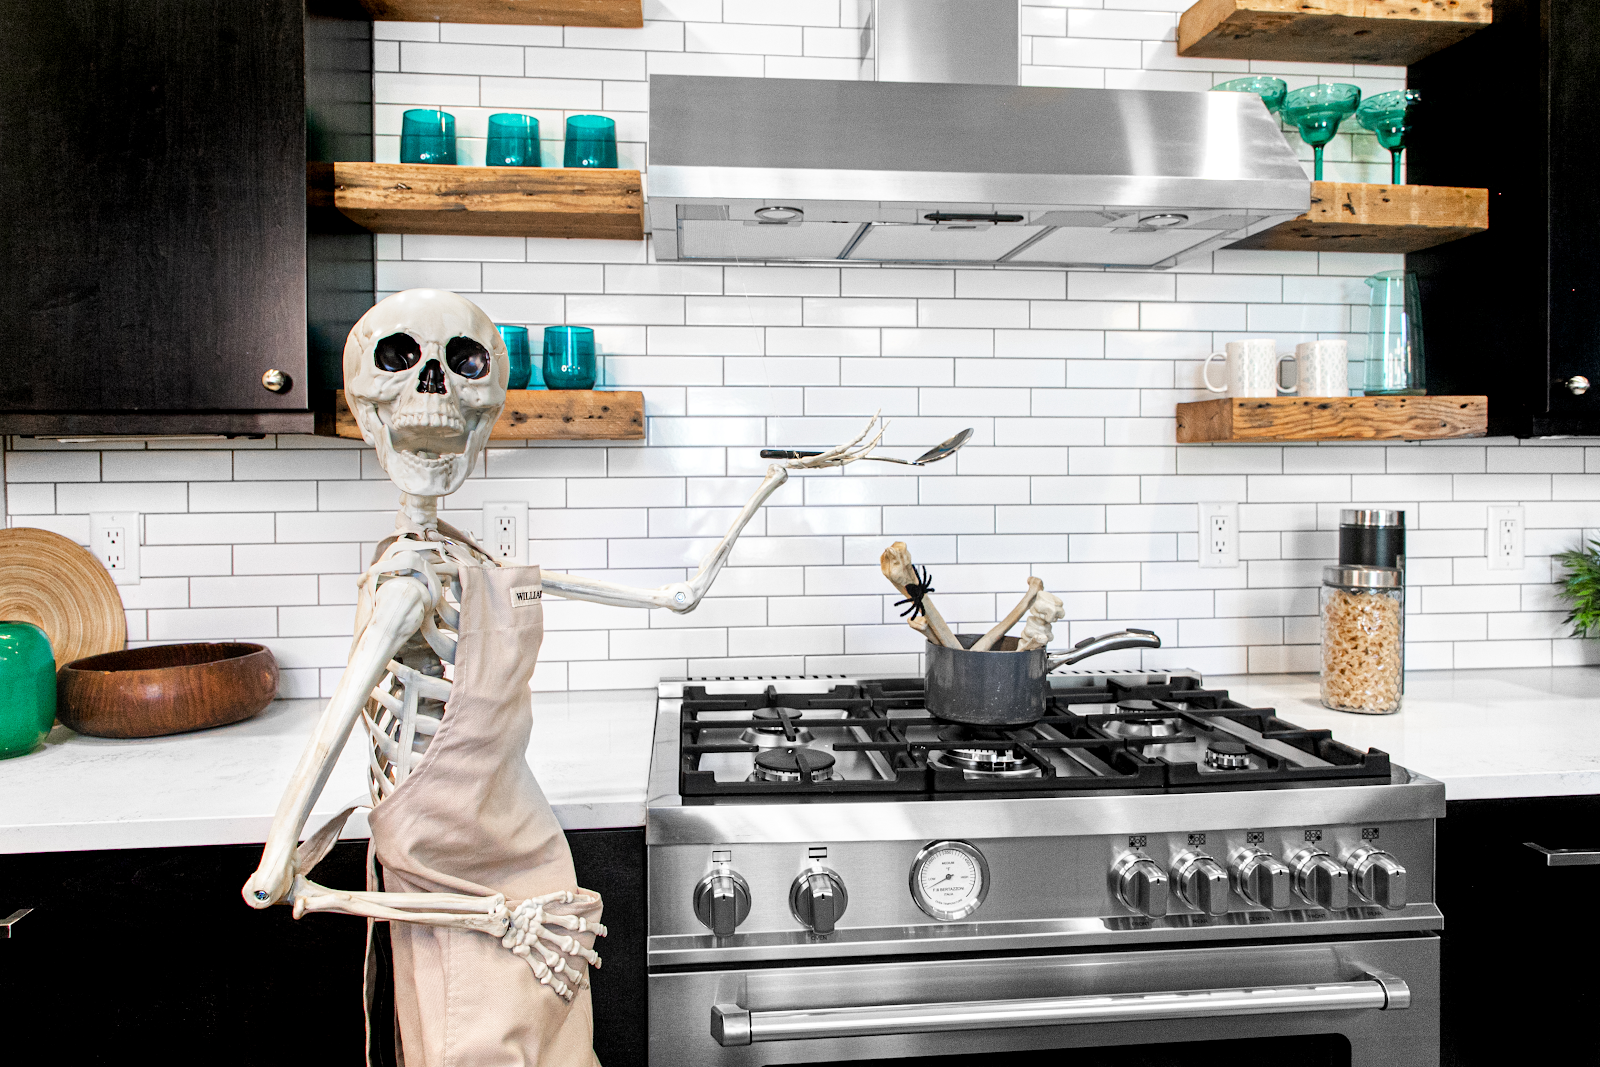 Real estate agent decorates homes with giant skeletons to drum up exposure: ‘People have really loved it’